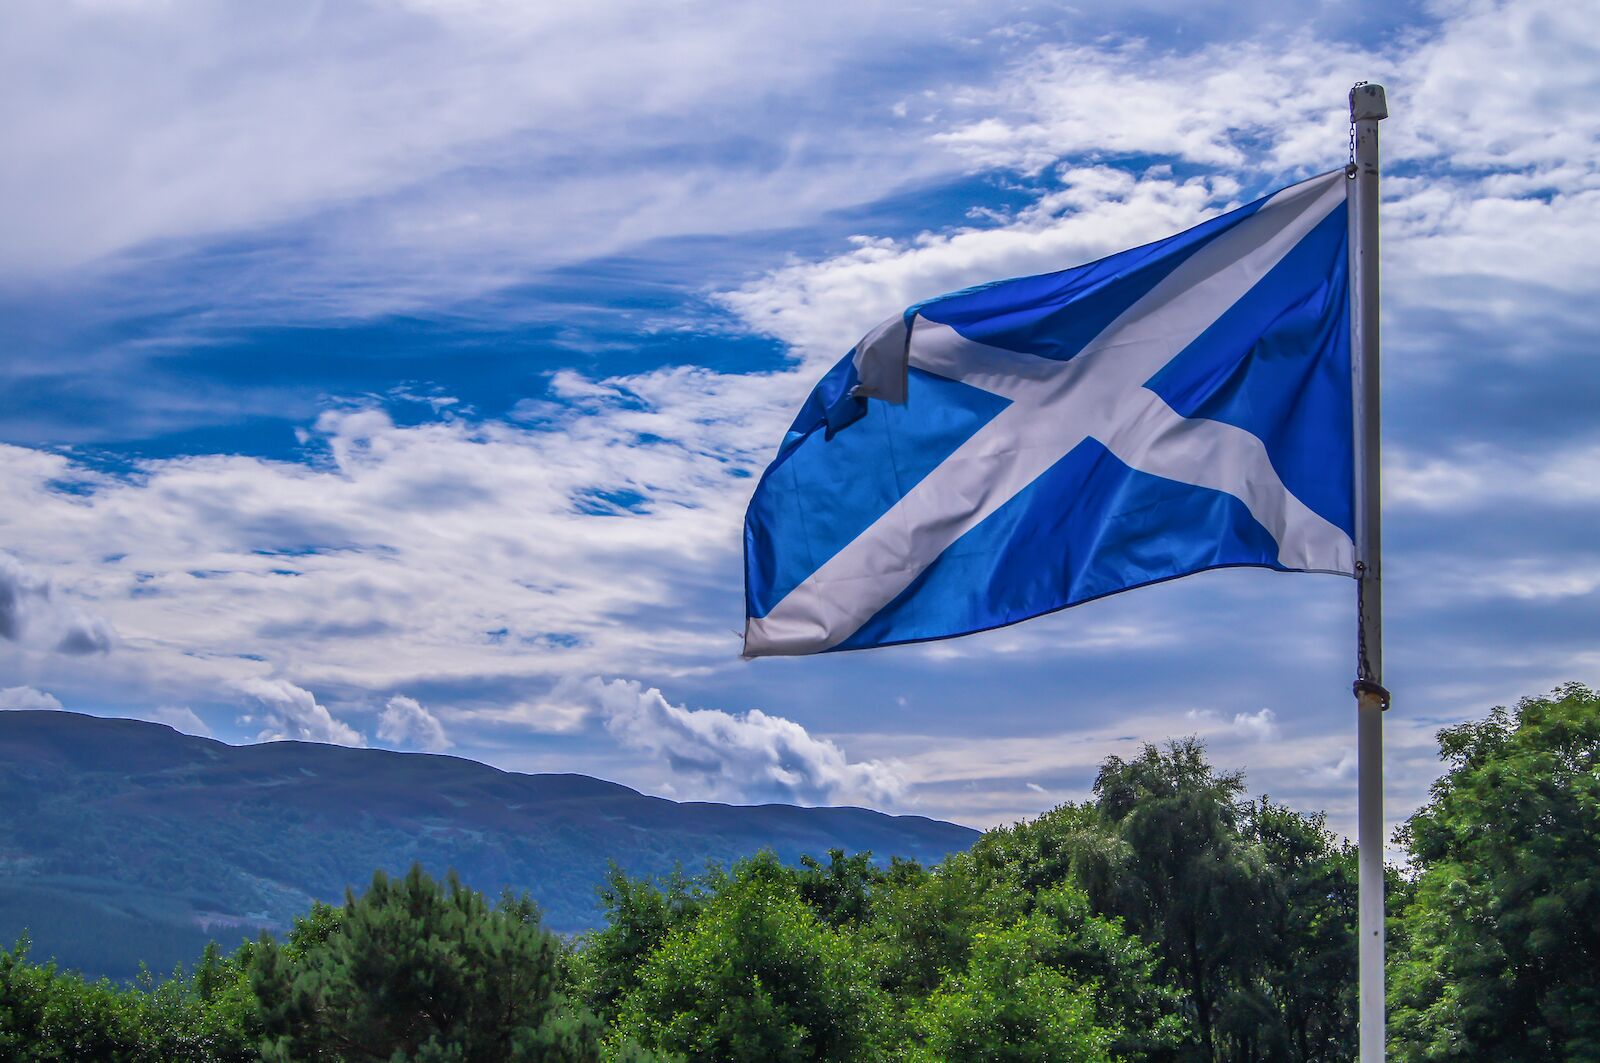 Celtic flags: Scotland. The Scottish flag is white and blue with a diagonal cross